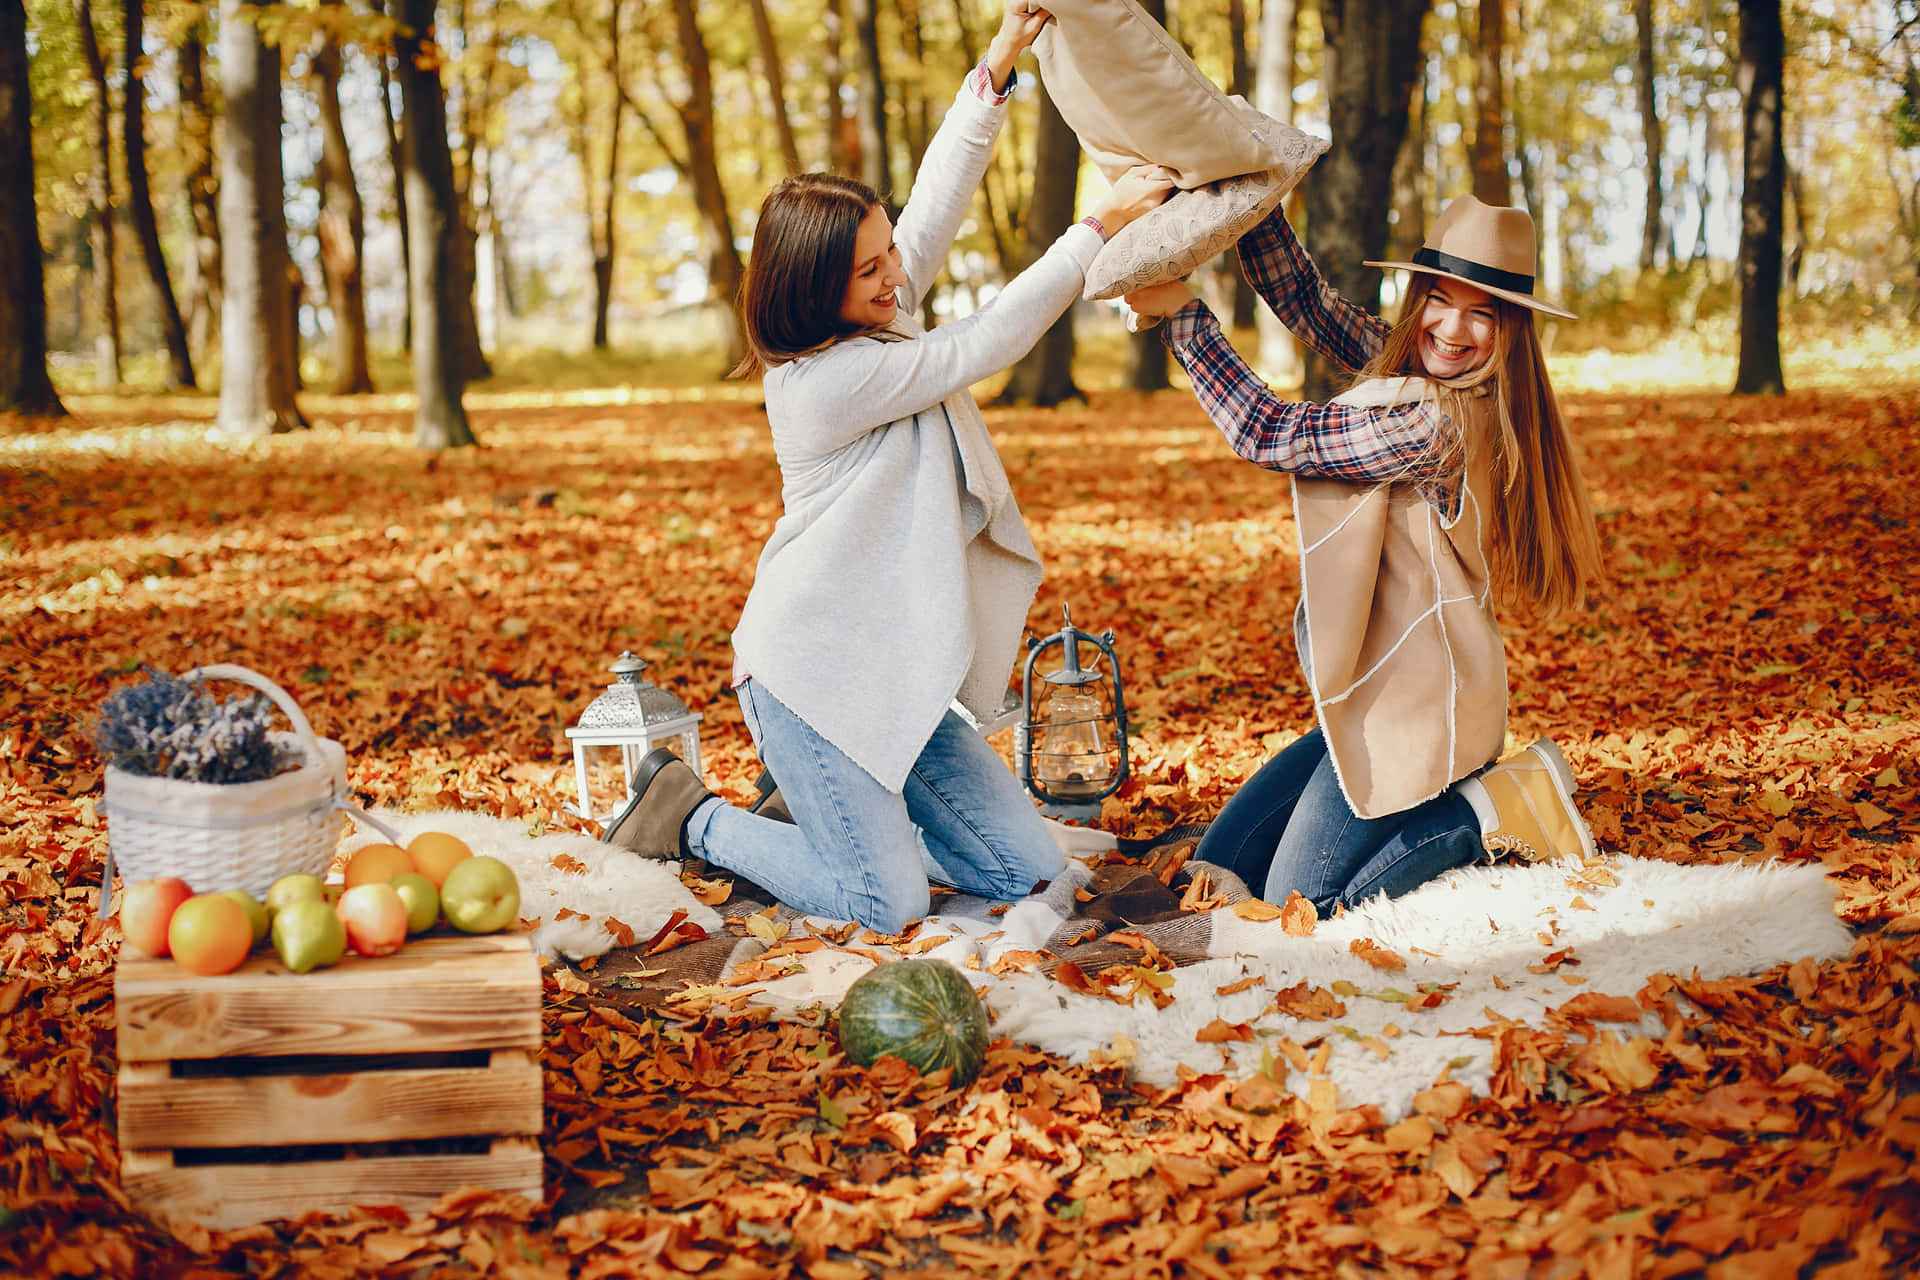 Capture your best family memories this Fall season!